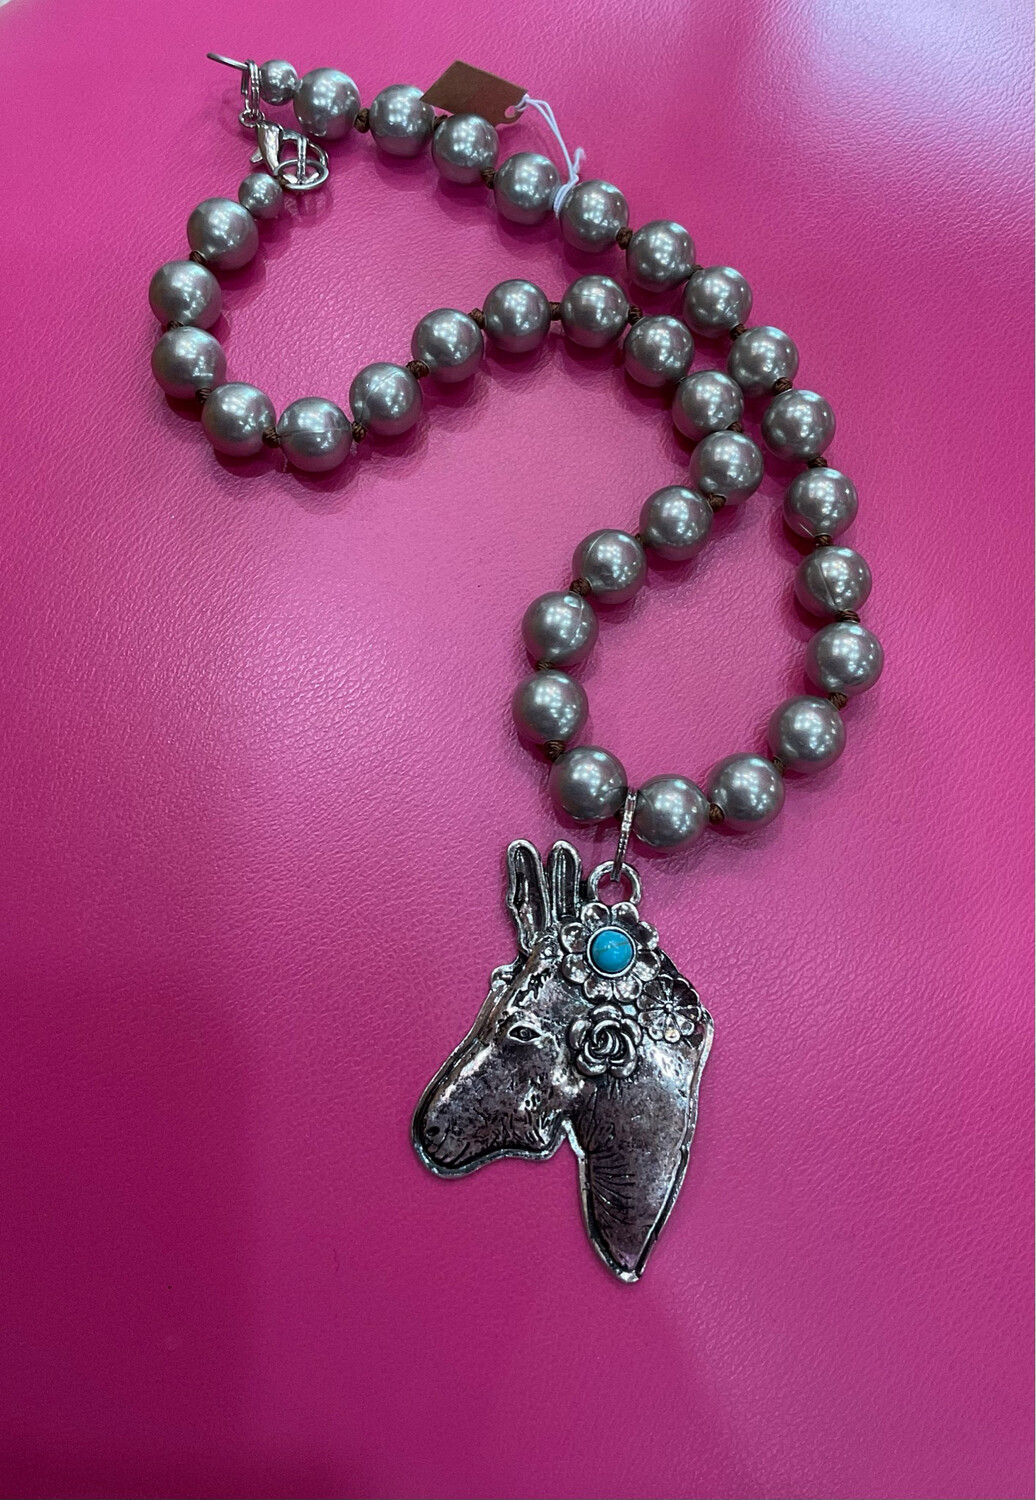 Accessories To Go Donkey Necklace 